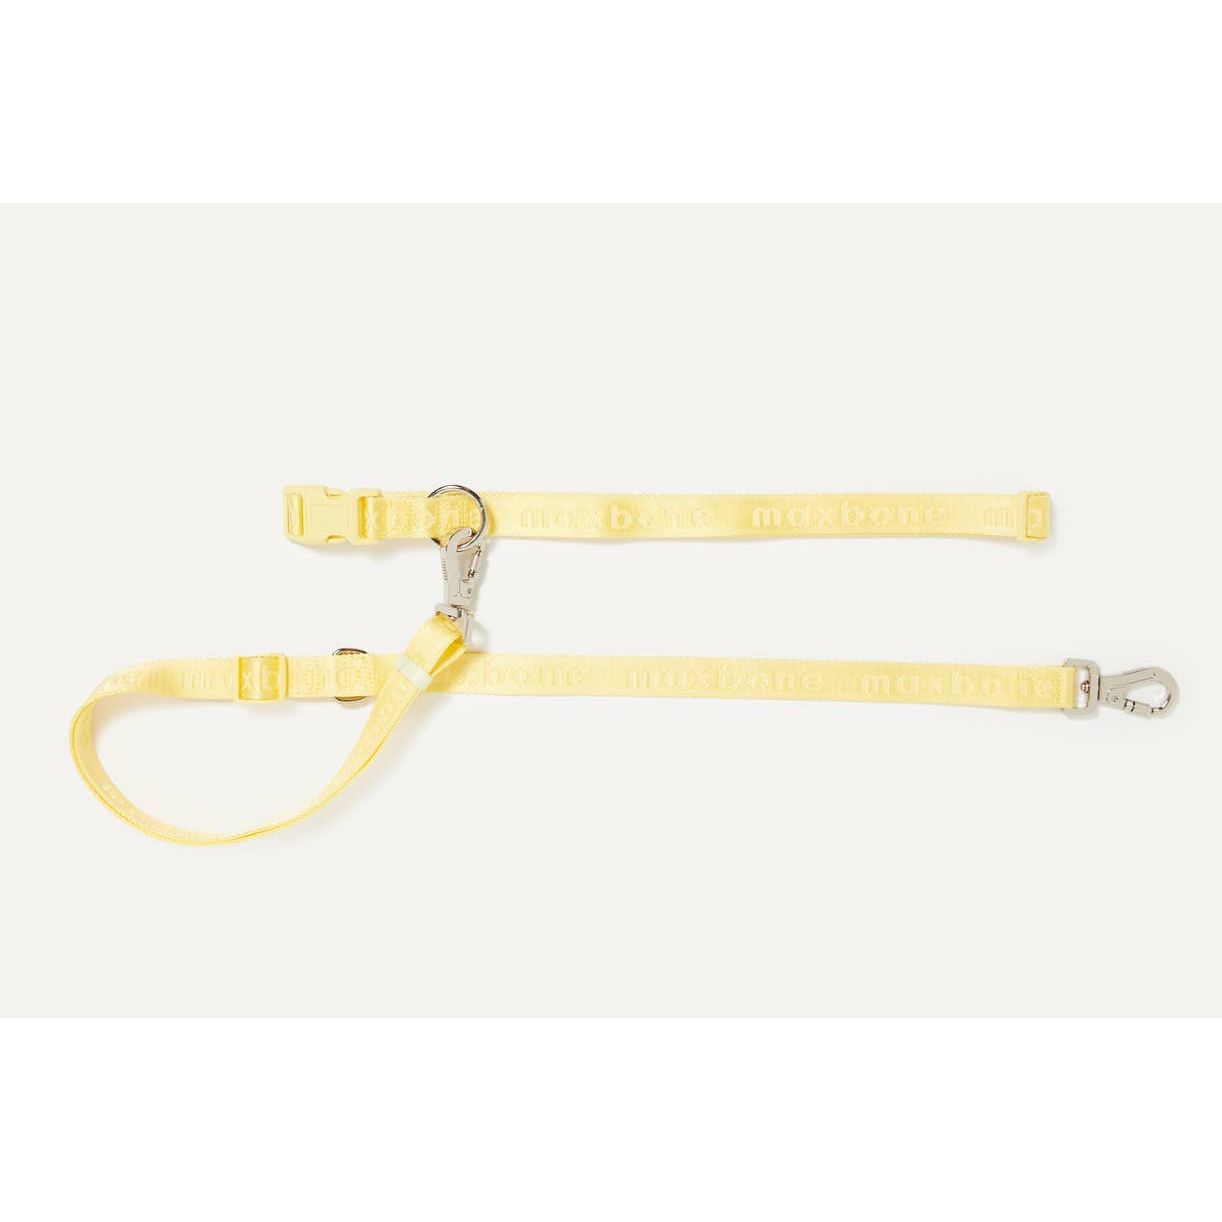 Maxbone Go With Ease! Hands Free Dog Leash